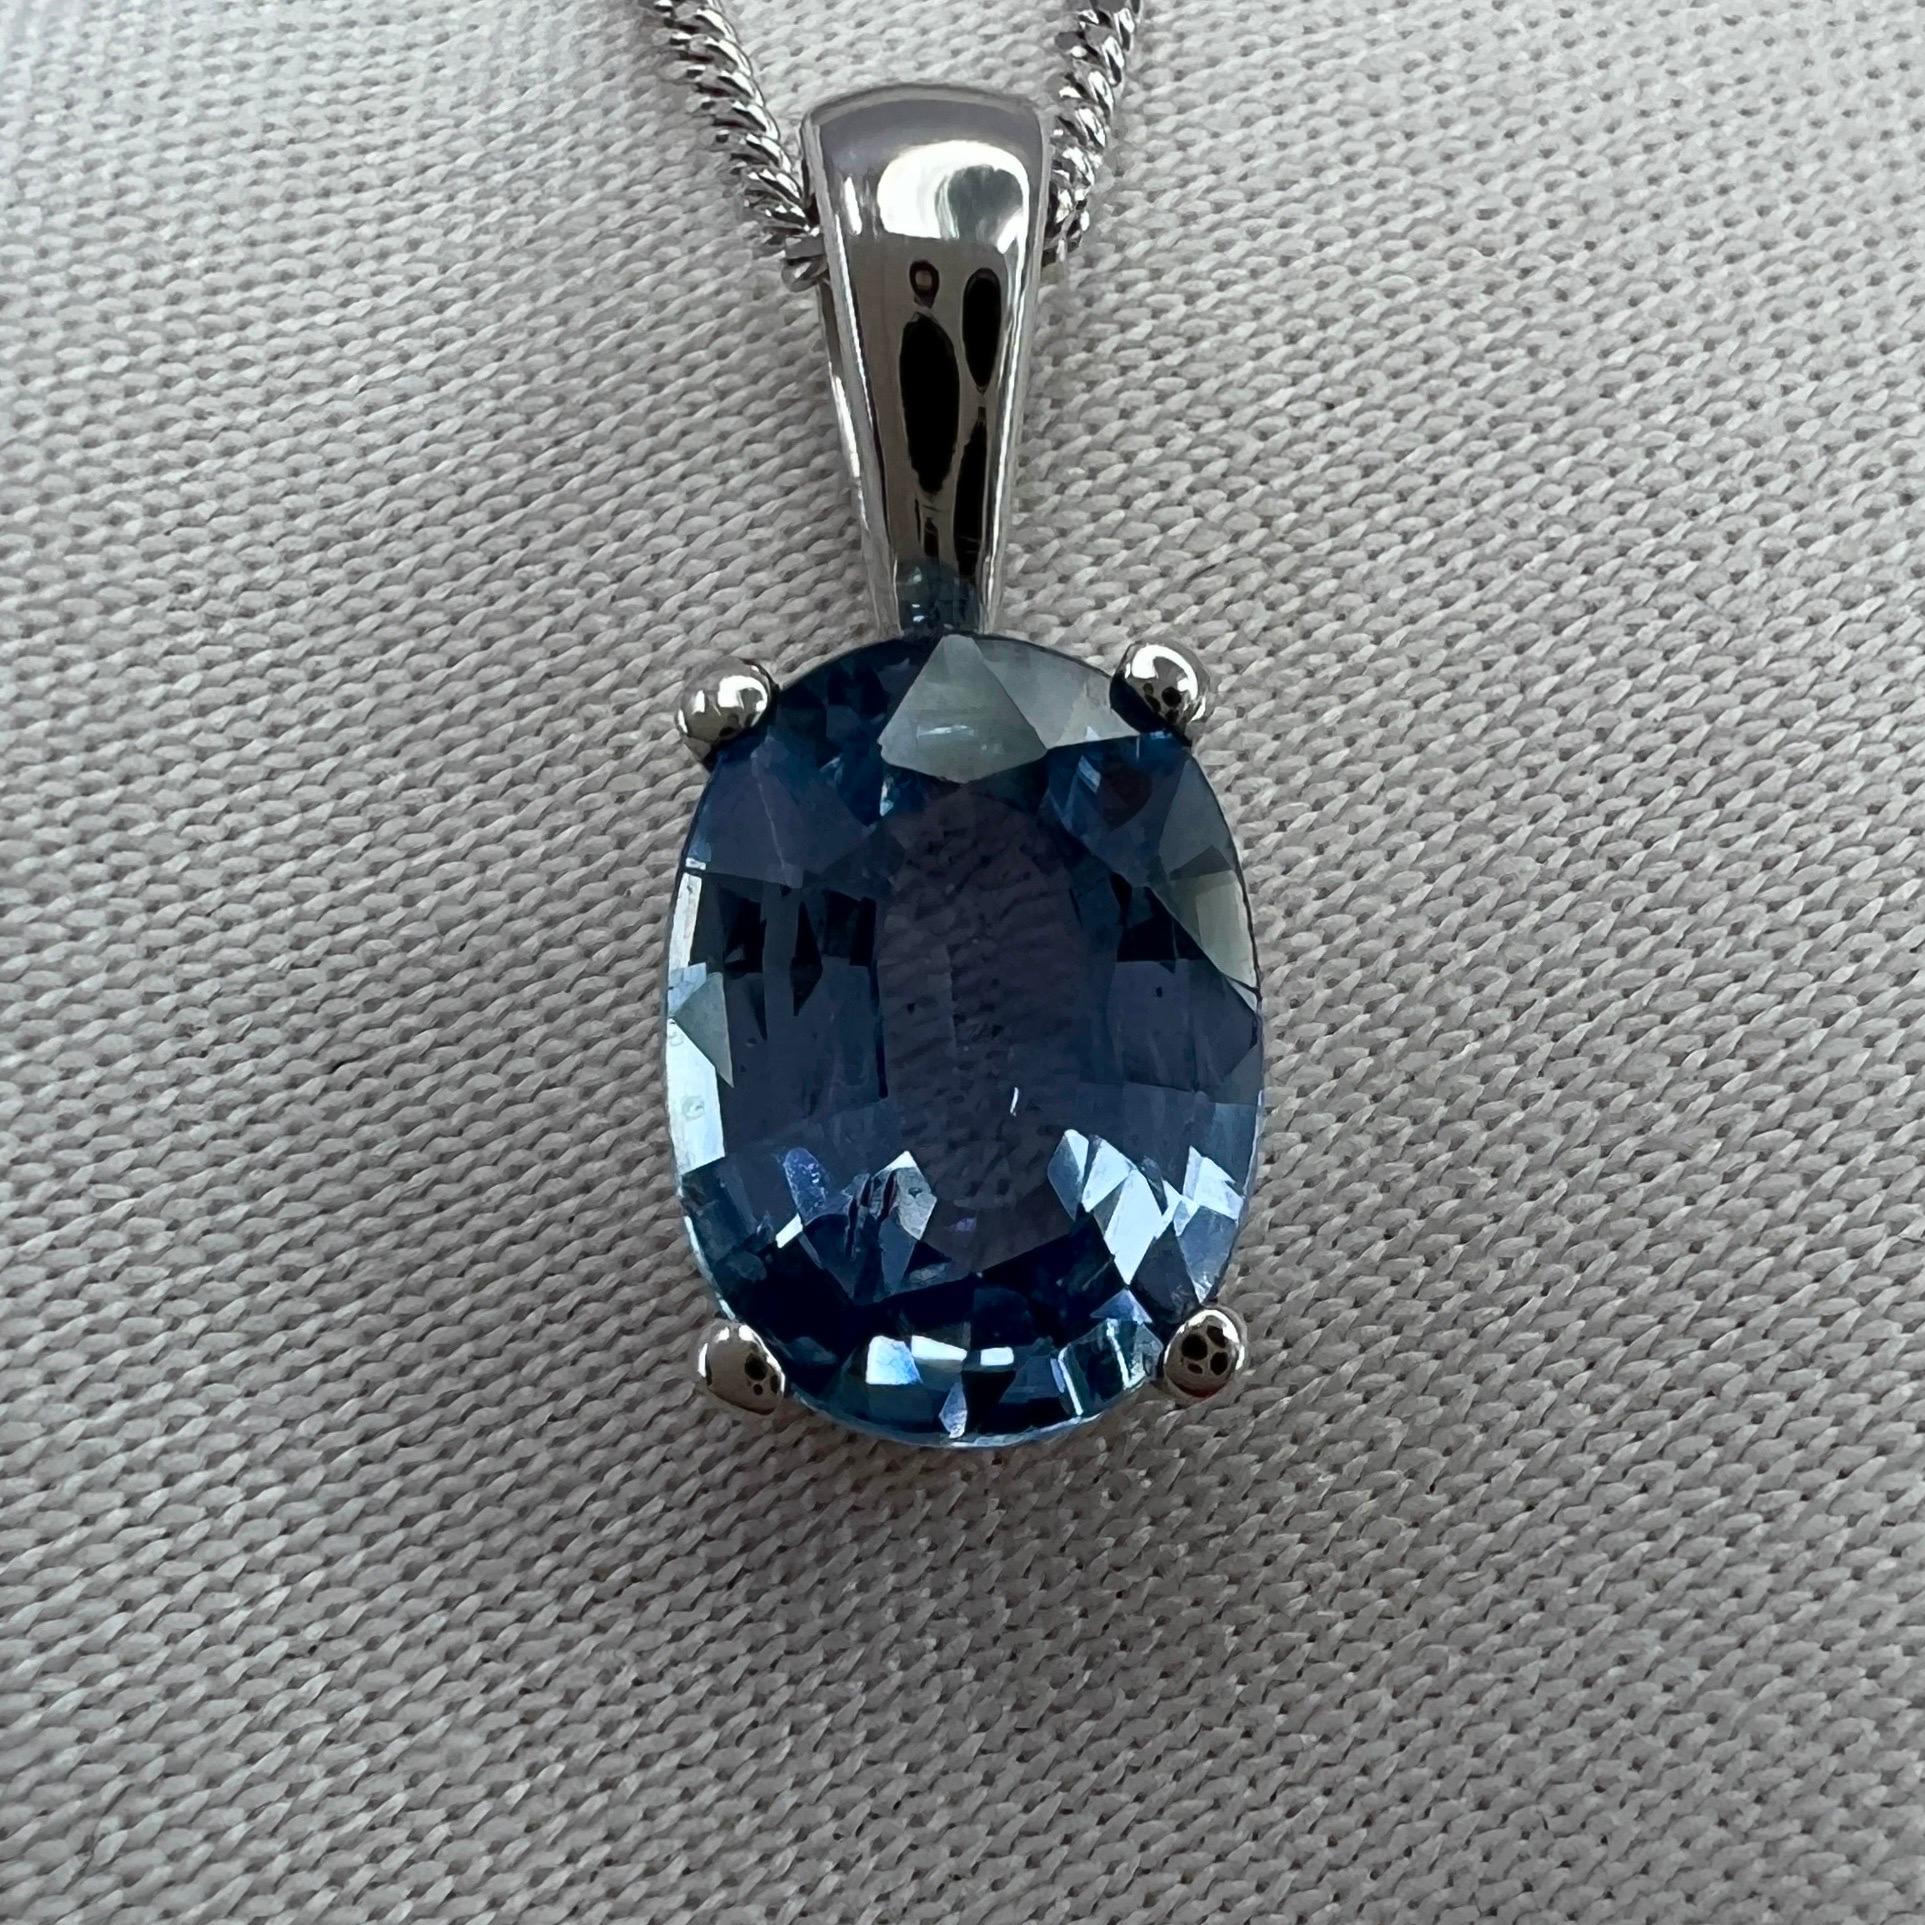 Indigo Blue Sapphire 18k White Gold Oval Cut Solitaire Pendant Necklace.

1.32 Carat sapphire with a beautiful indigo blue colour and very good clarity, very clean stone with only some small natural inclusions visible when looking closely
Also has